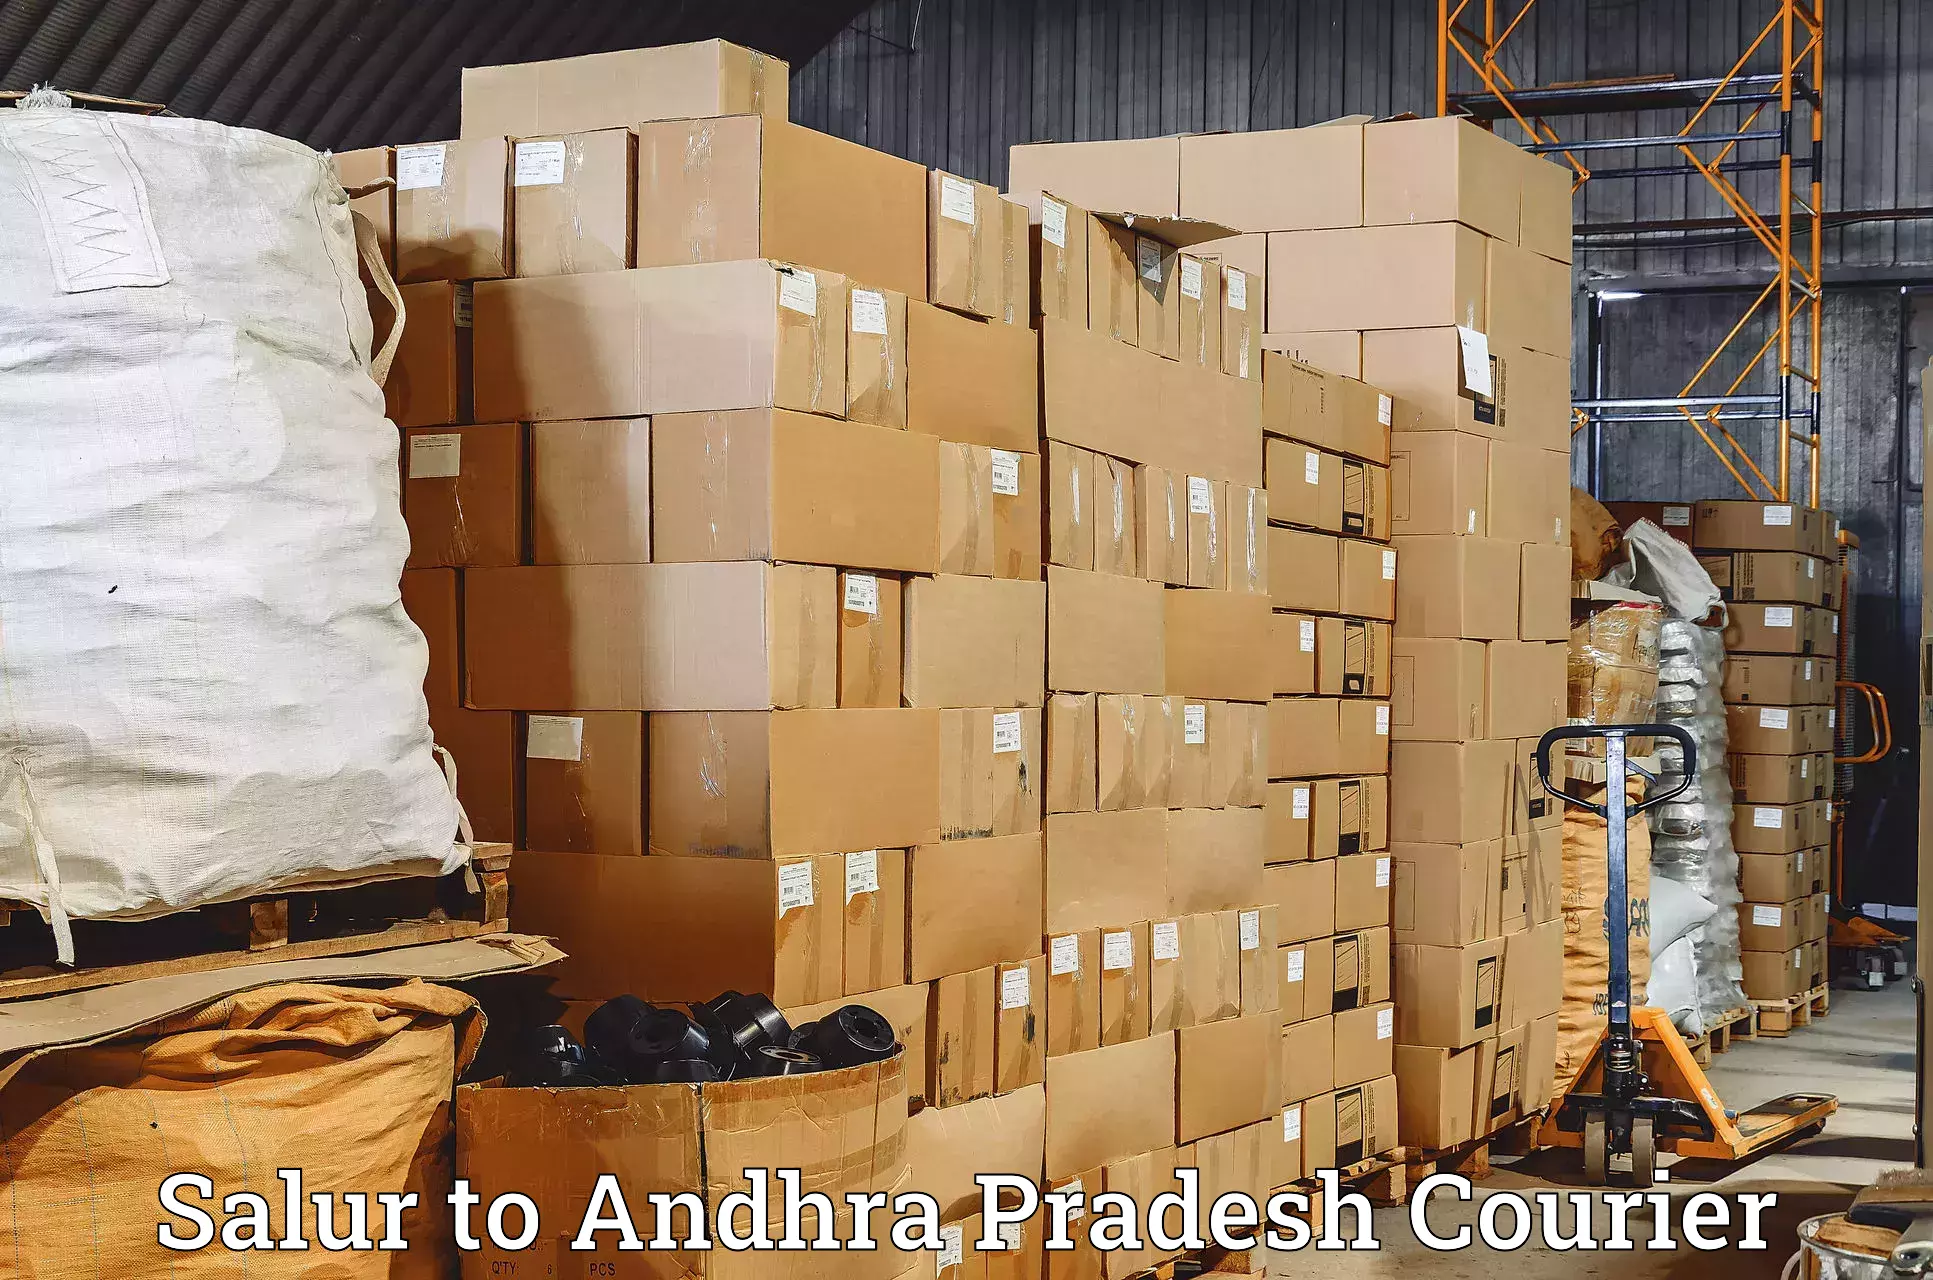 Custom courier packaging in Salur to Chandragiri